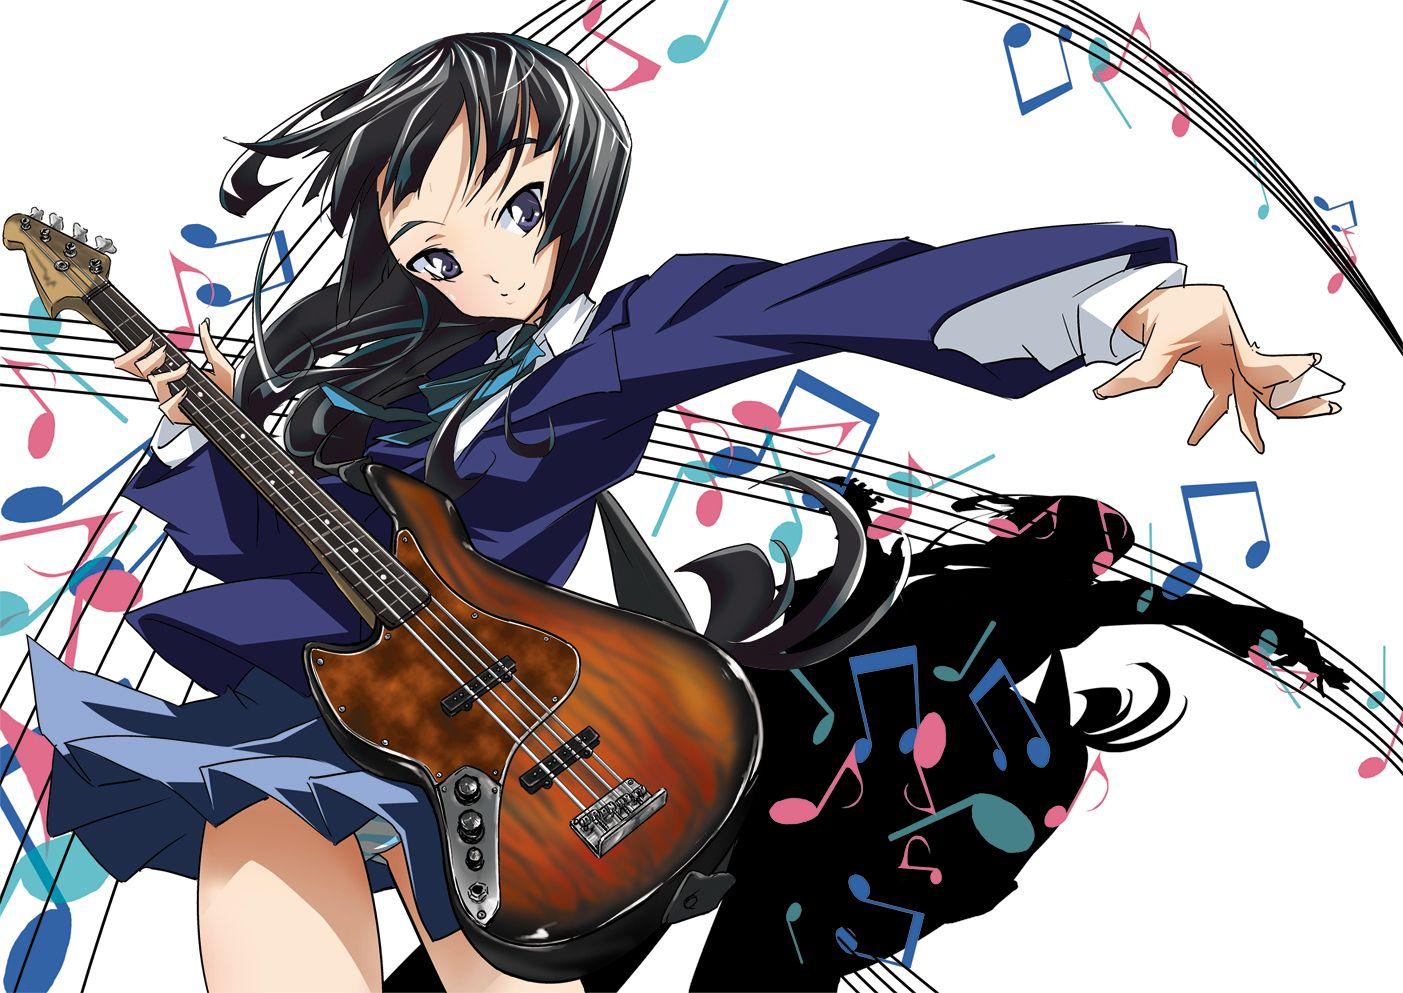 Anime Guitarist Wallpapers - Top Free Anime Guitarist Backgrounds